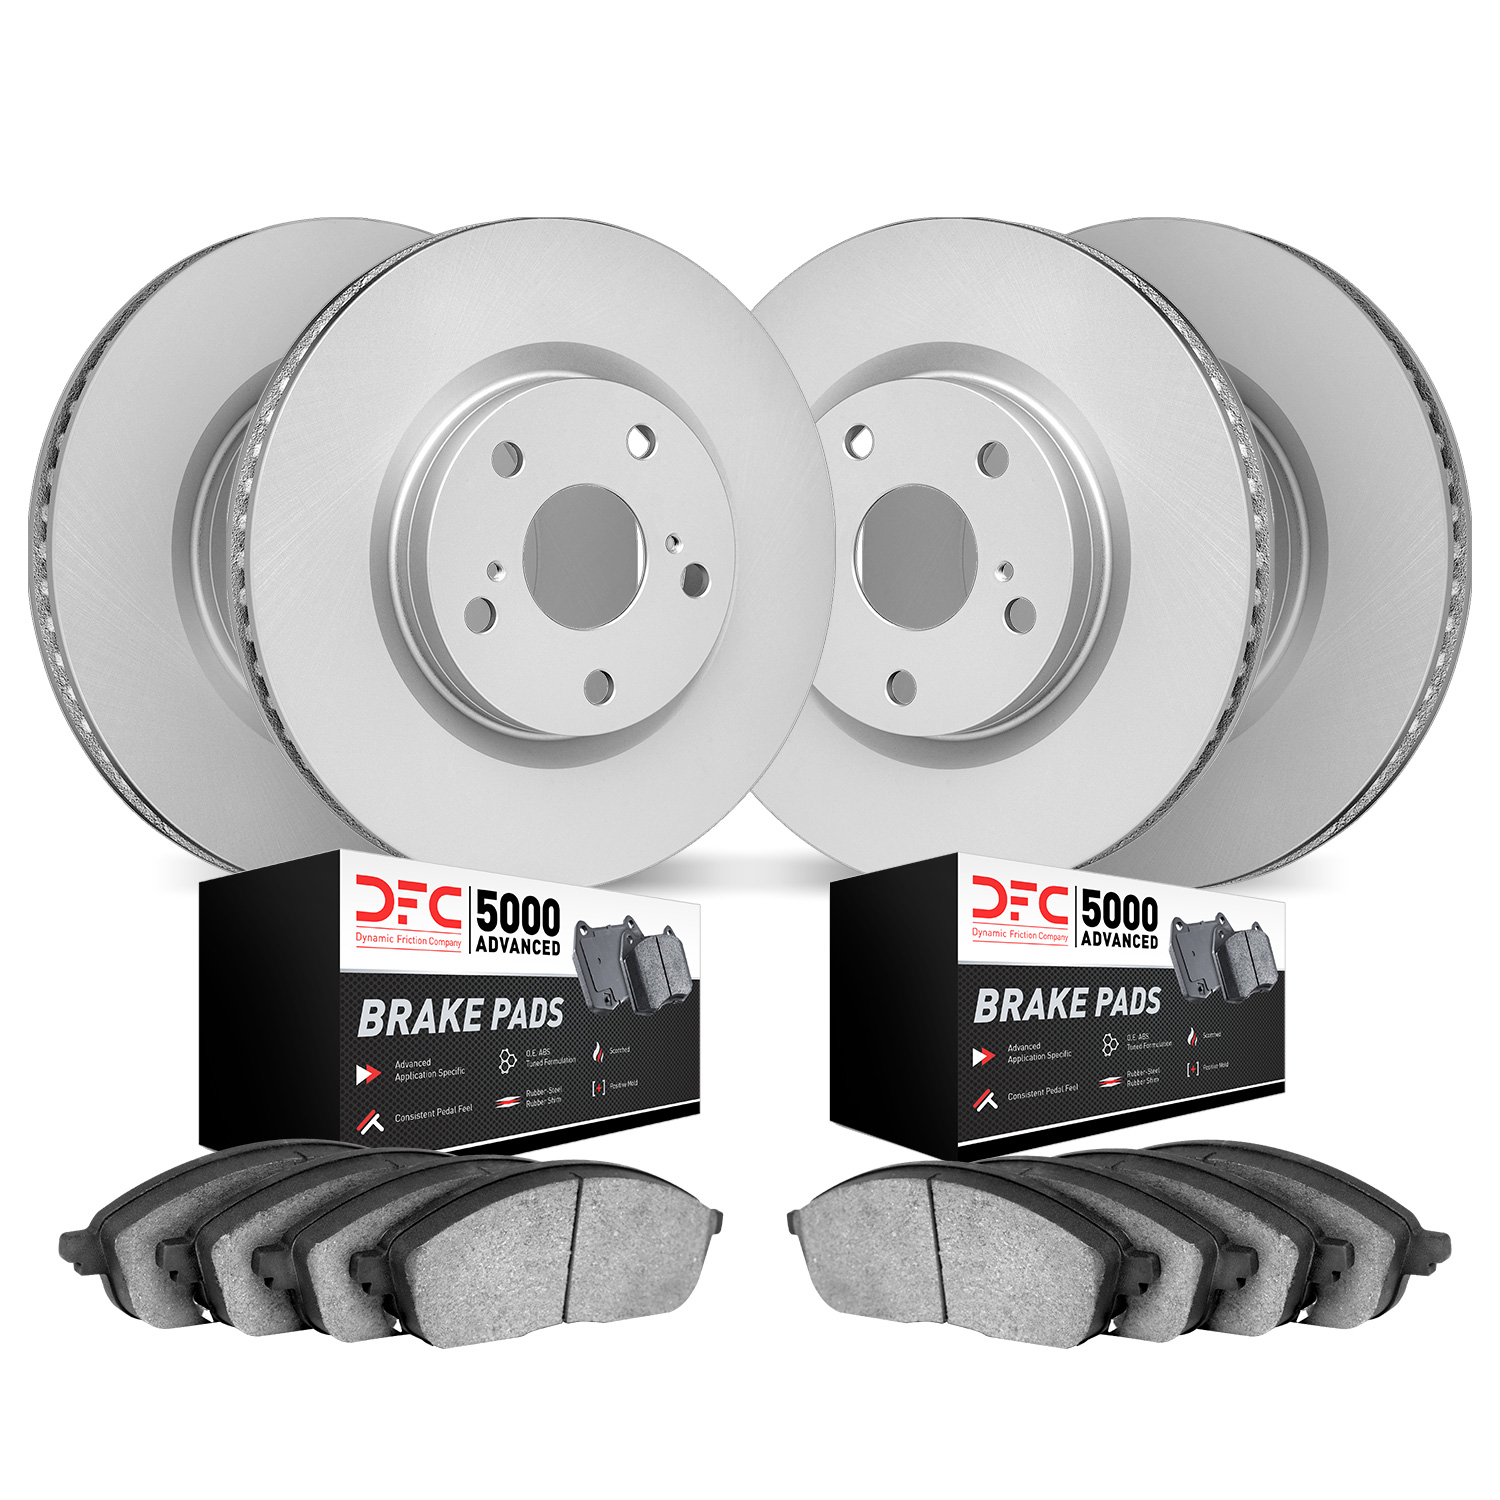 4504-63053 Geospec Brake Rotors w/5000 Advanced Brake Pads Kit, 2008-2011 Mercedes-Benz, Position: Front and Rear